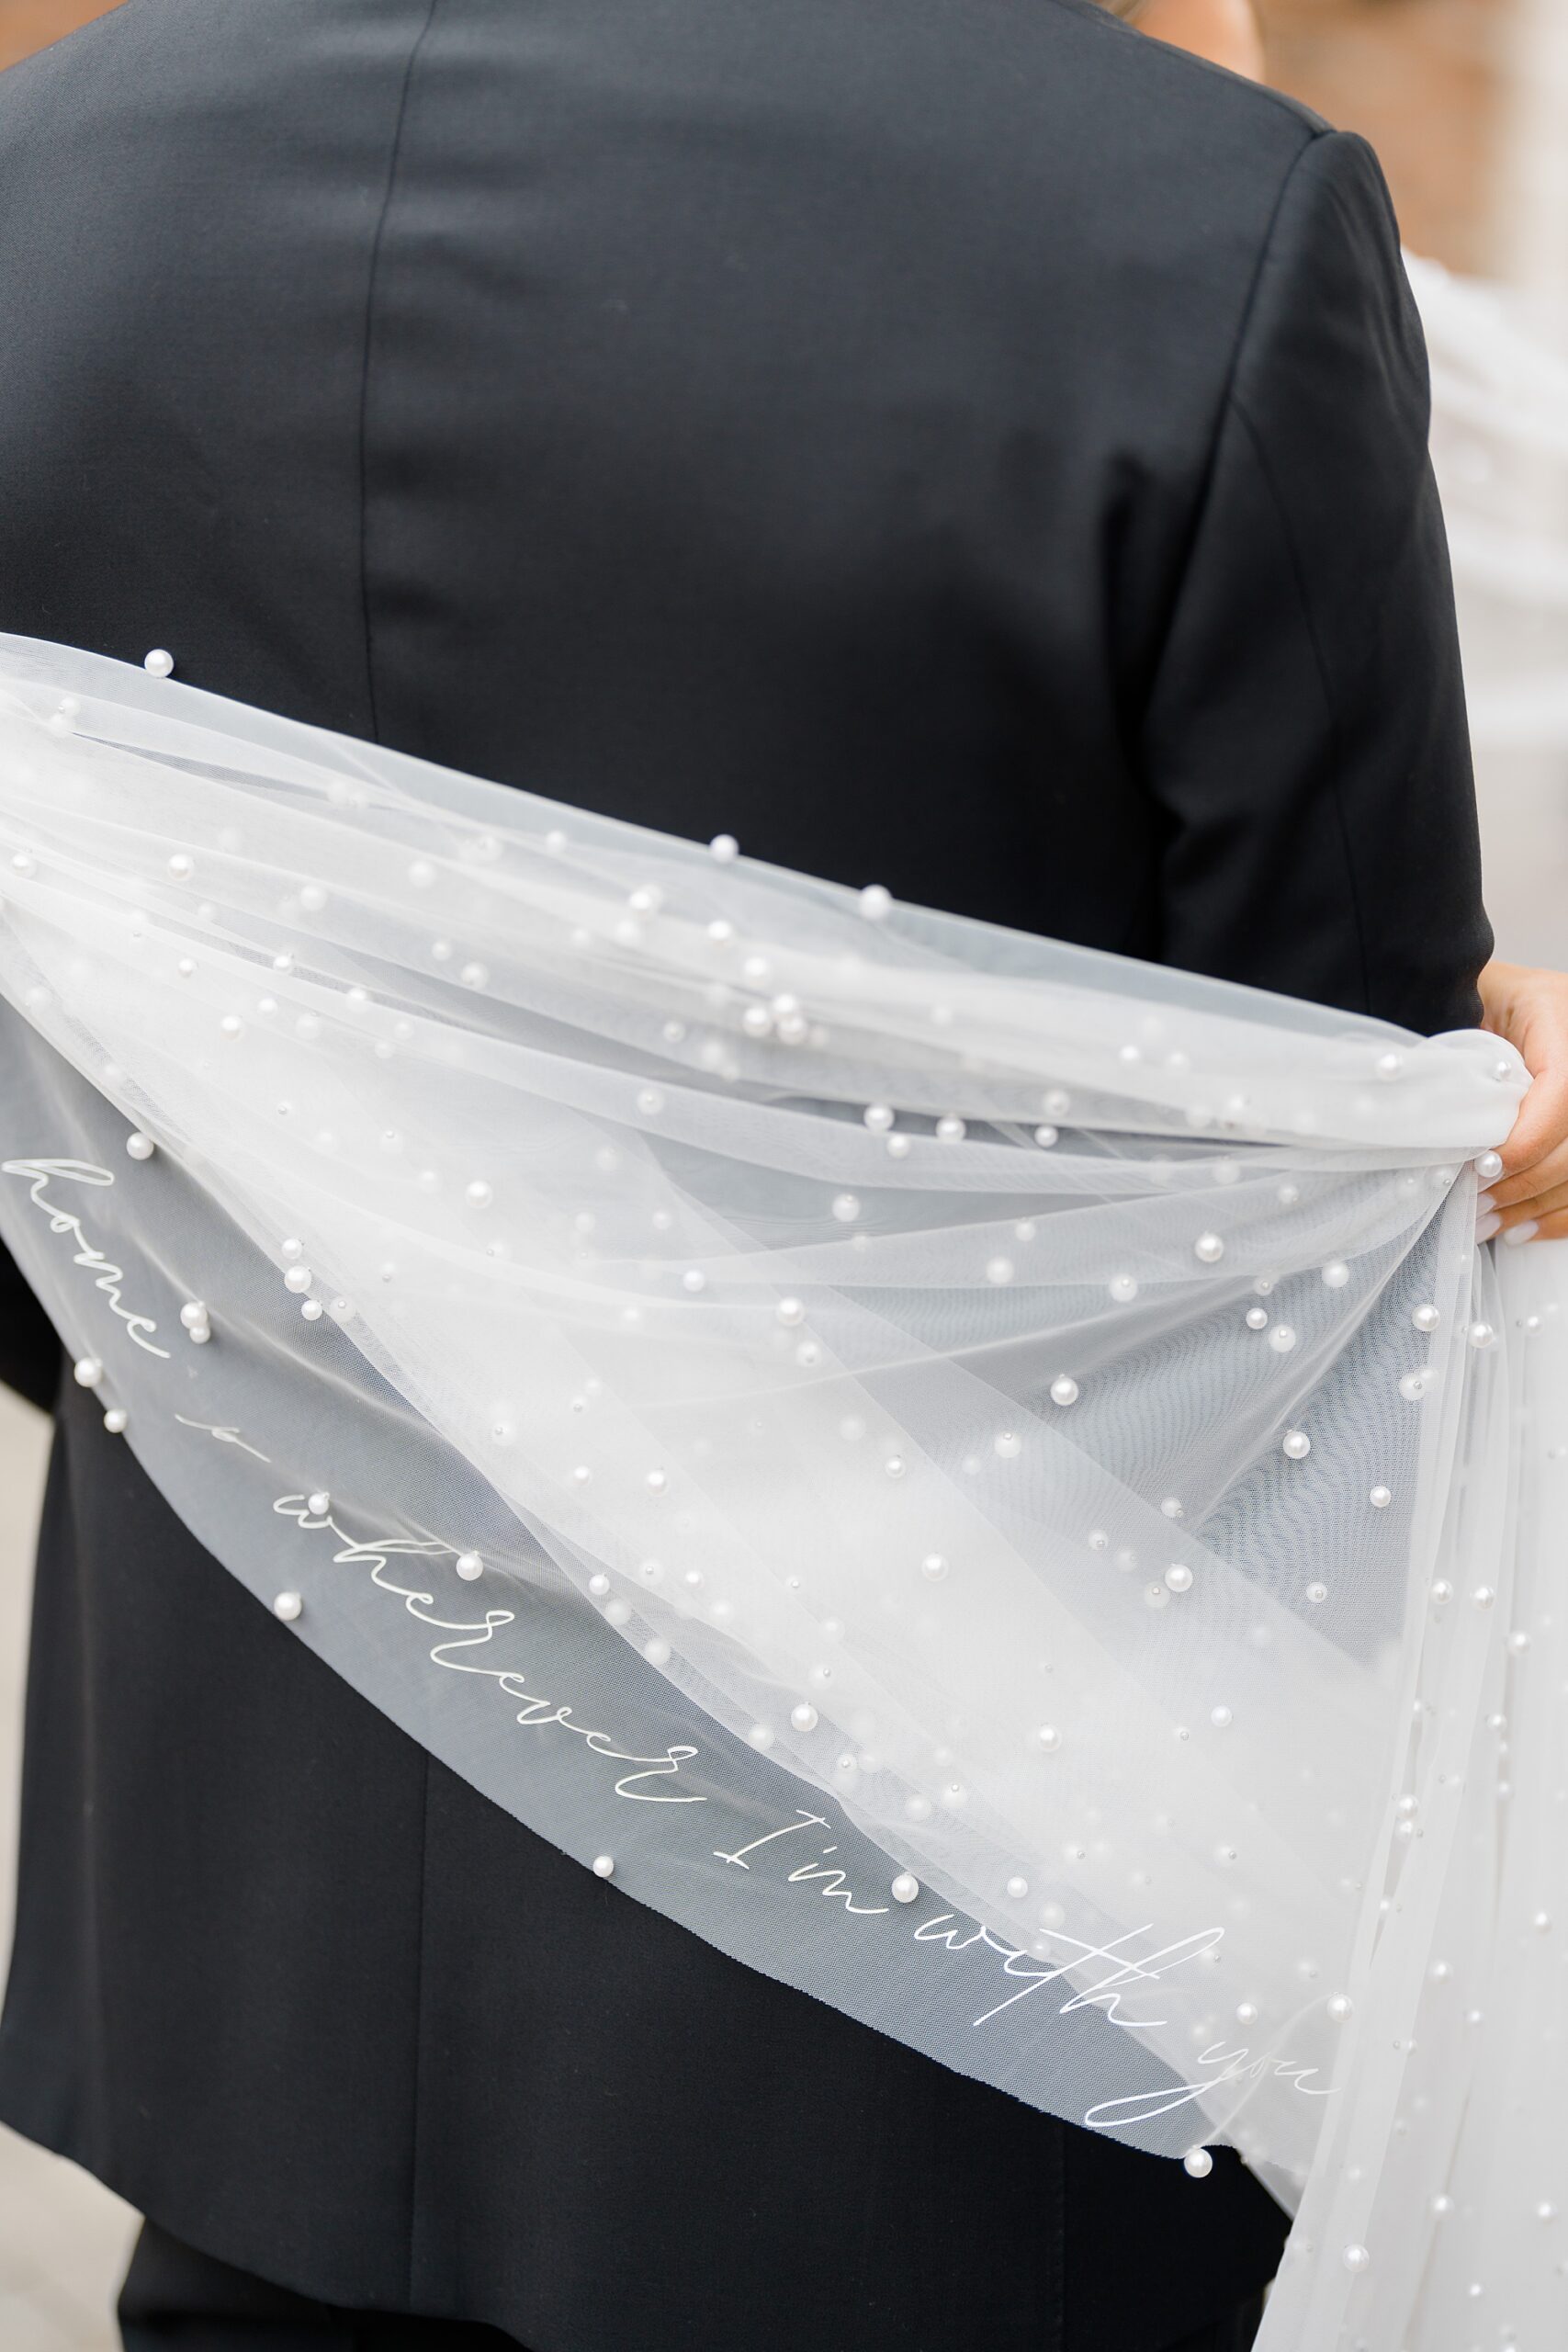 bride's veil decorated with pearls and quote